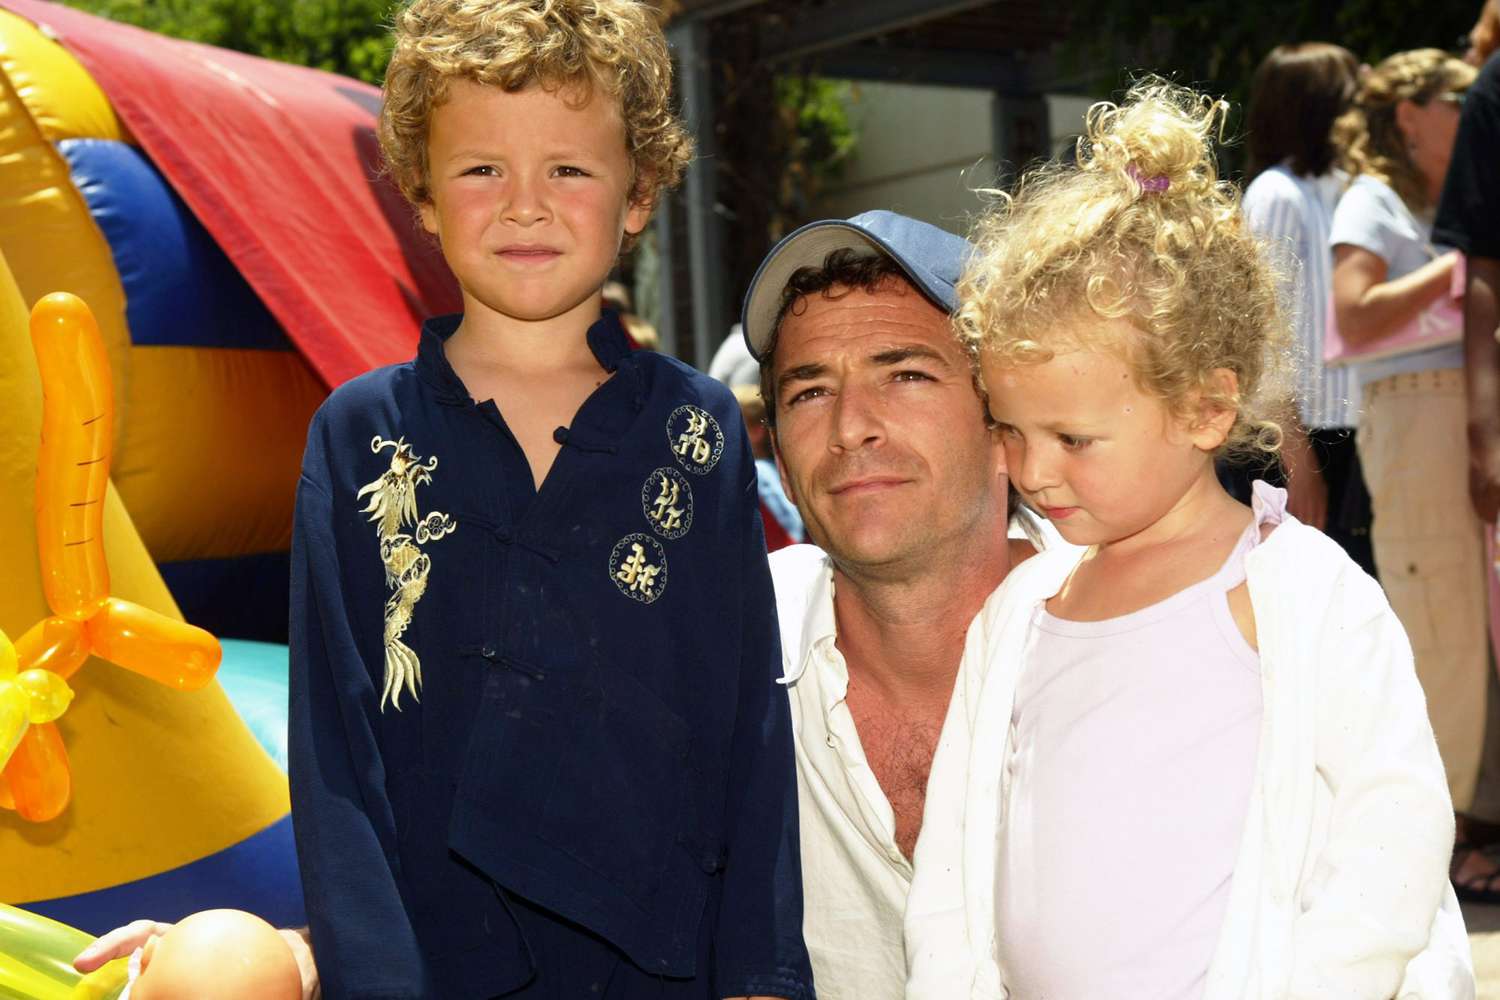 Luke Perry with son Jack and daughter Sophie in Los Angeles in 2004